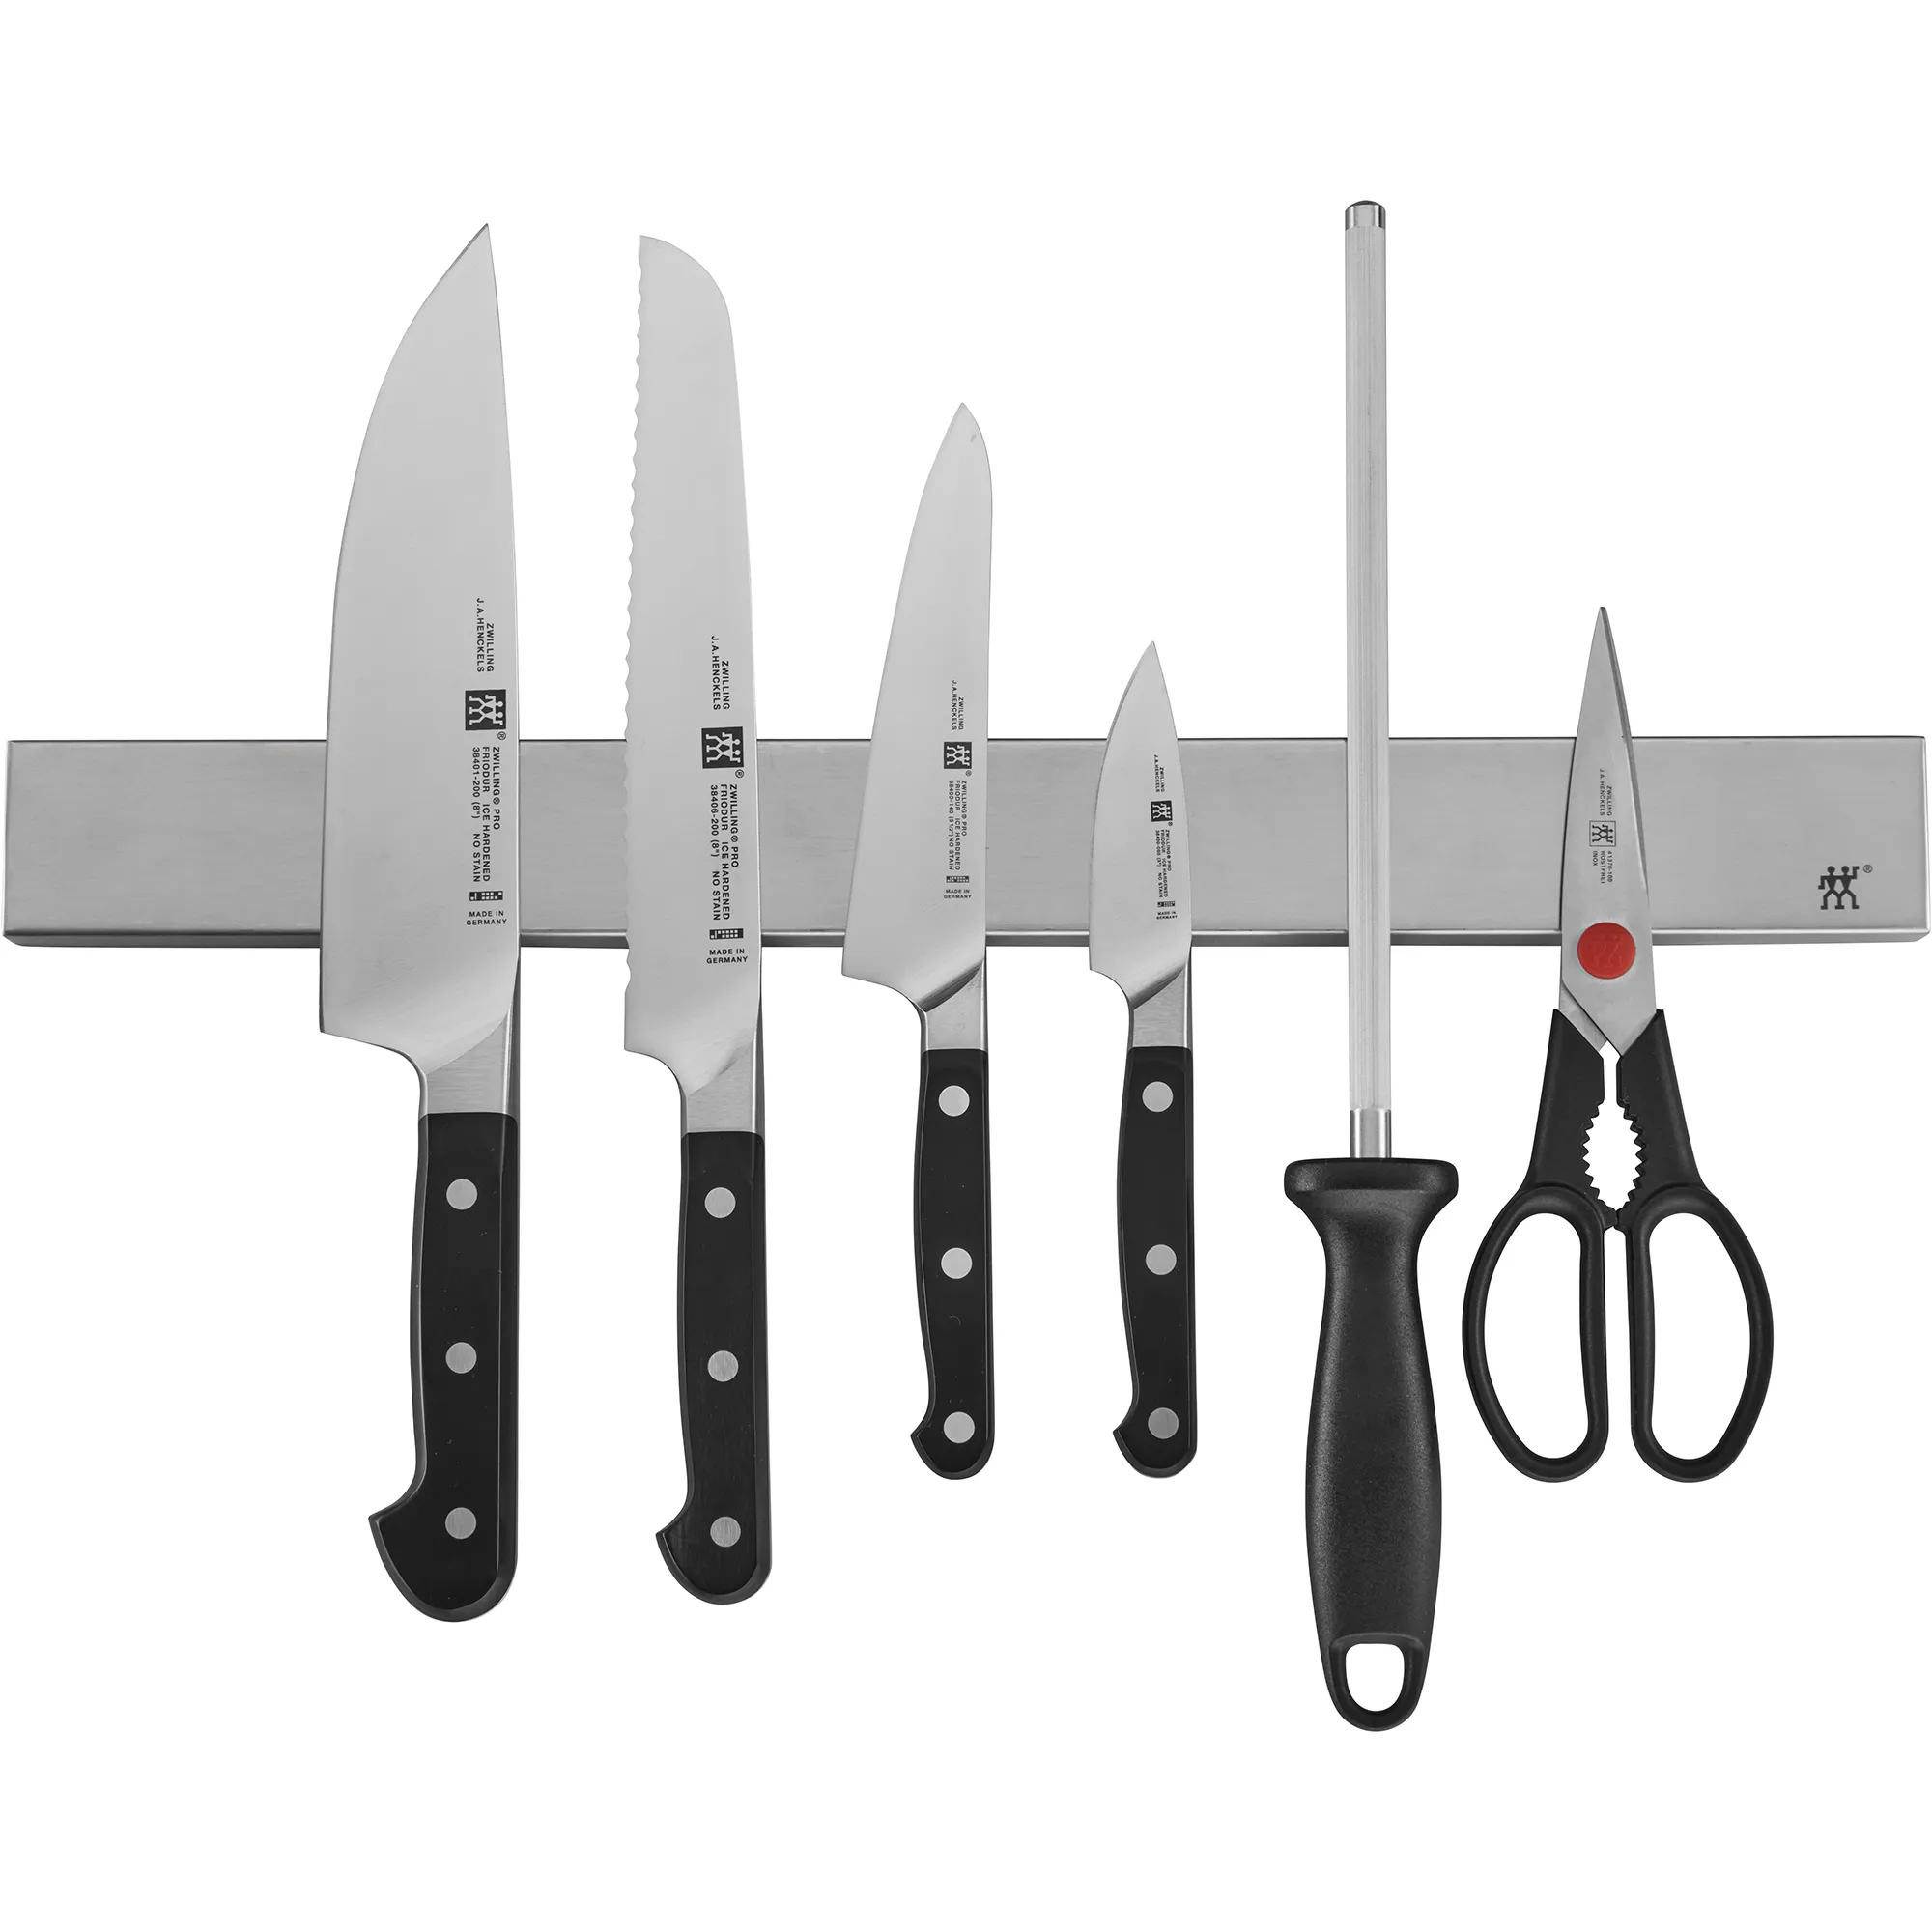 https://www.homethreads.com/files/zwilling/38431-007-zwilling-pro-7-pc-knife-set-with-175-inch-stainless-magnetic-knife-bar.webp